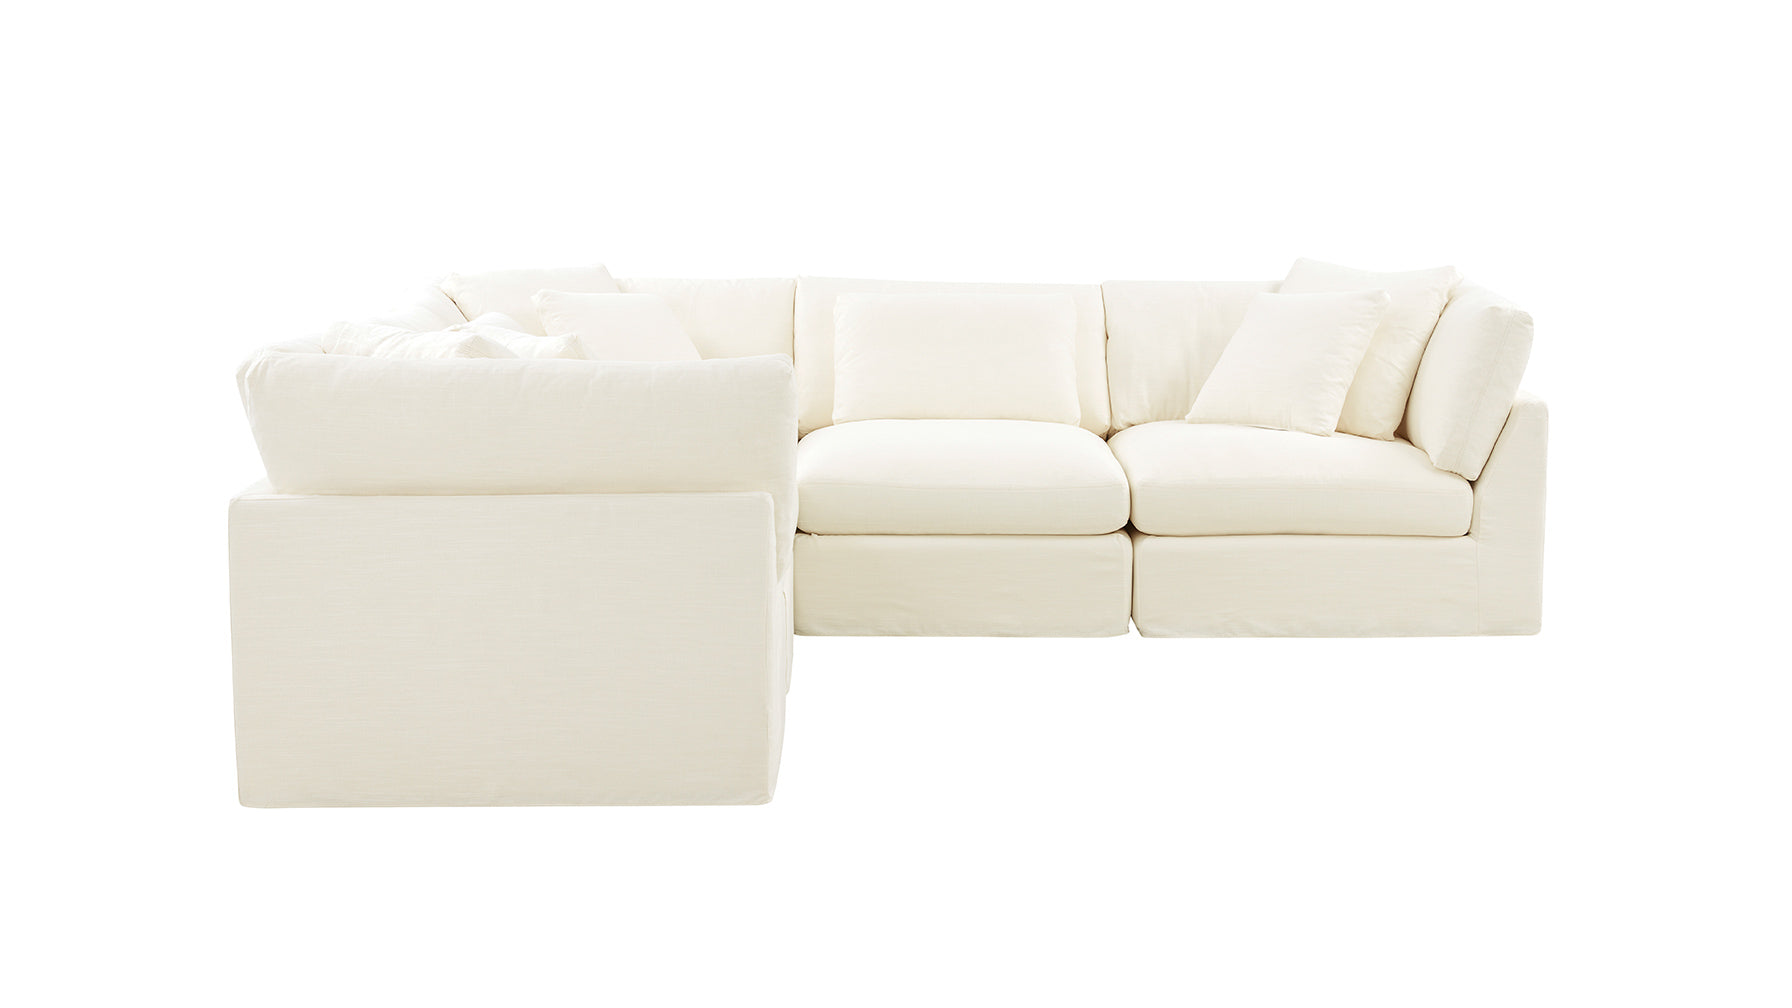 Get Together™ 5-Piece Modular Sectional Closed, Large, Cream Linen - Image 6